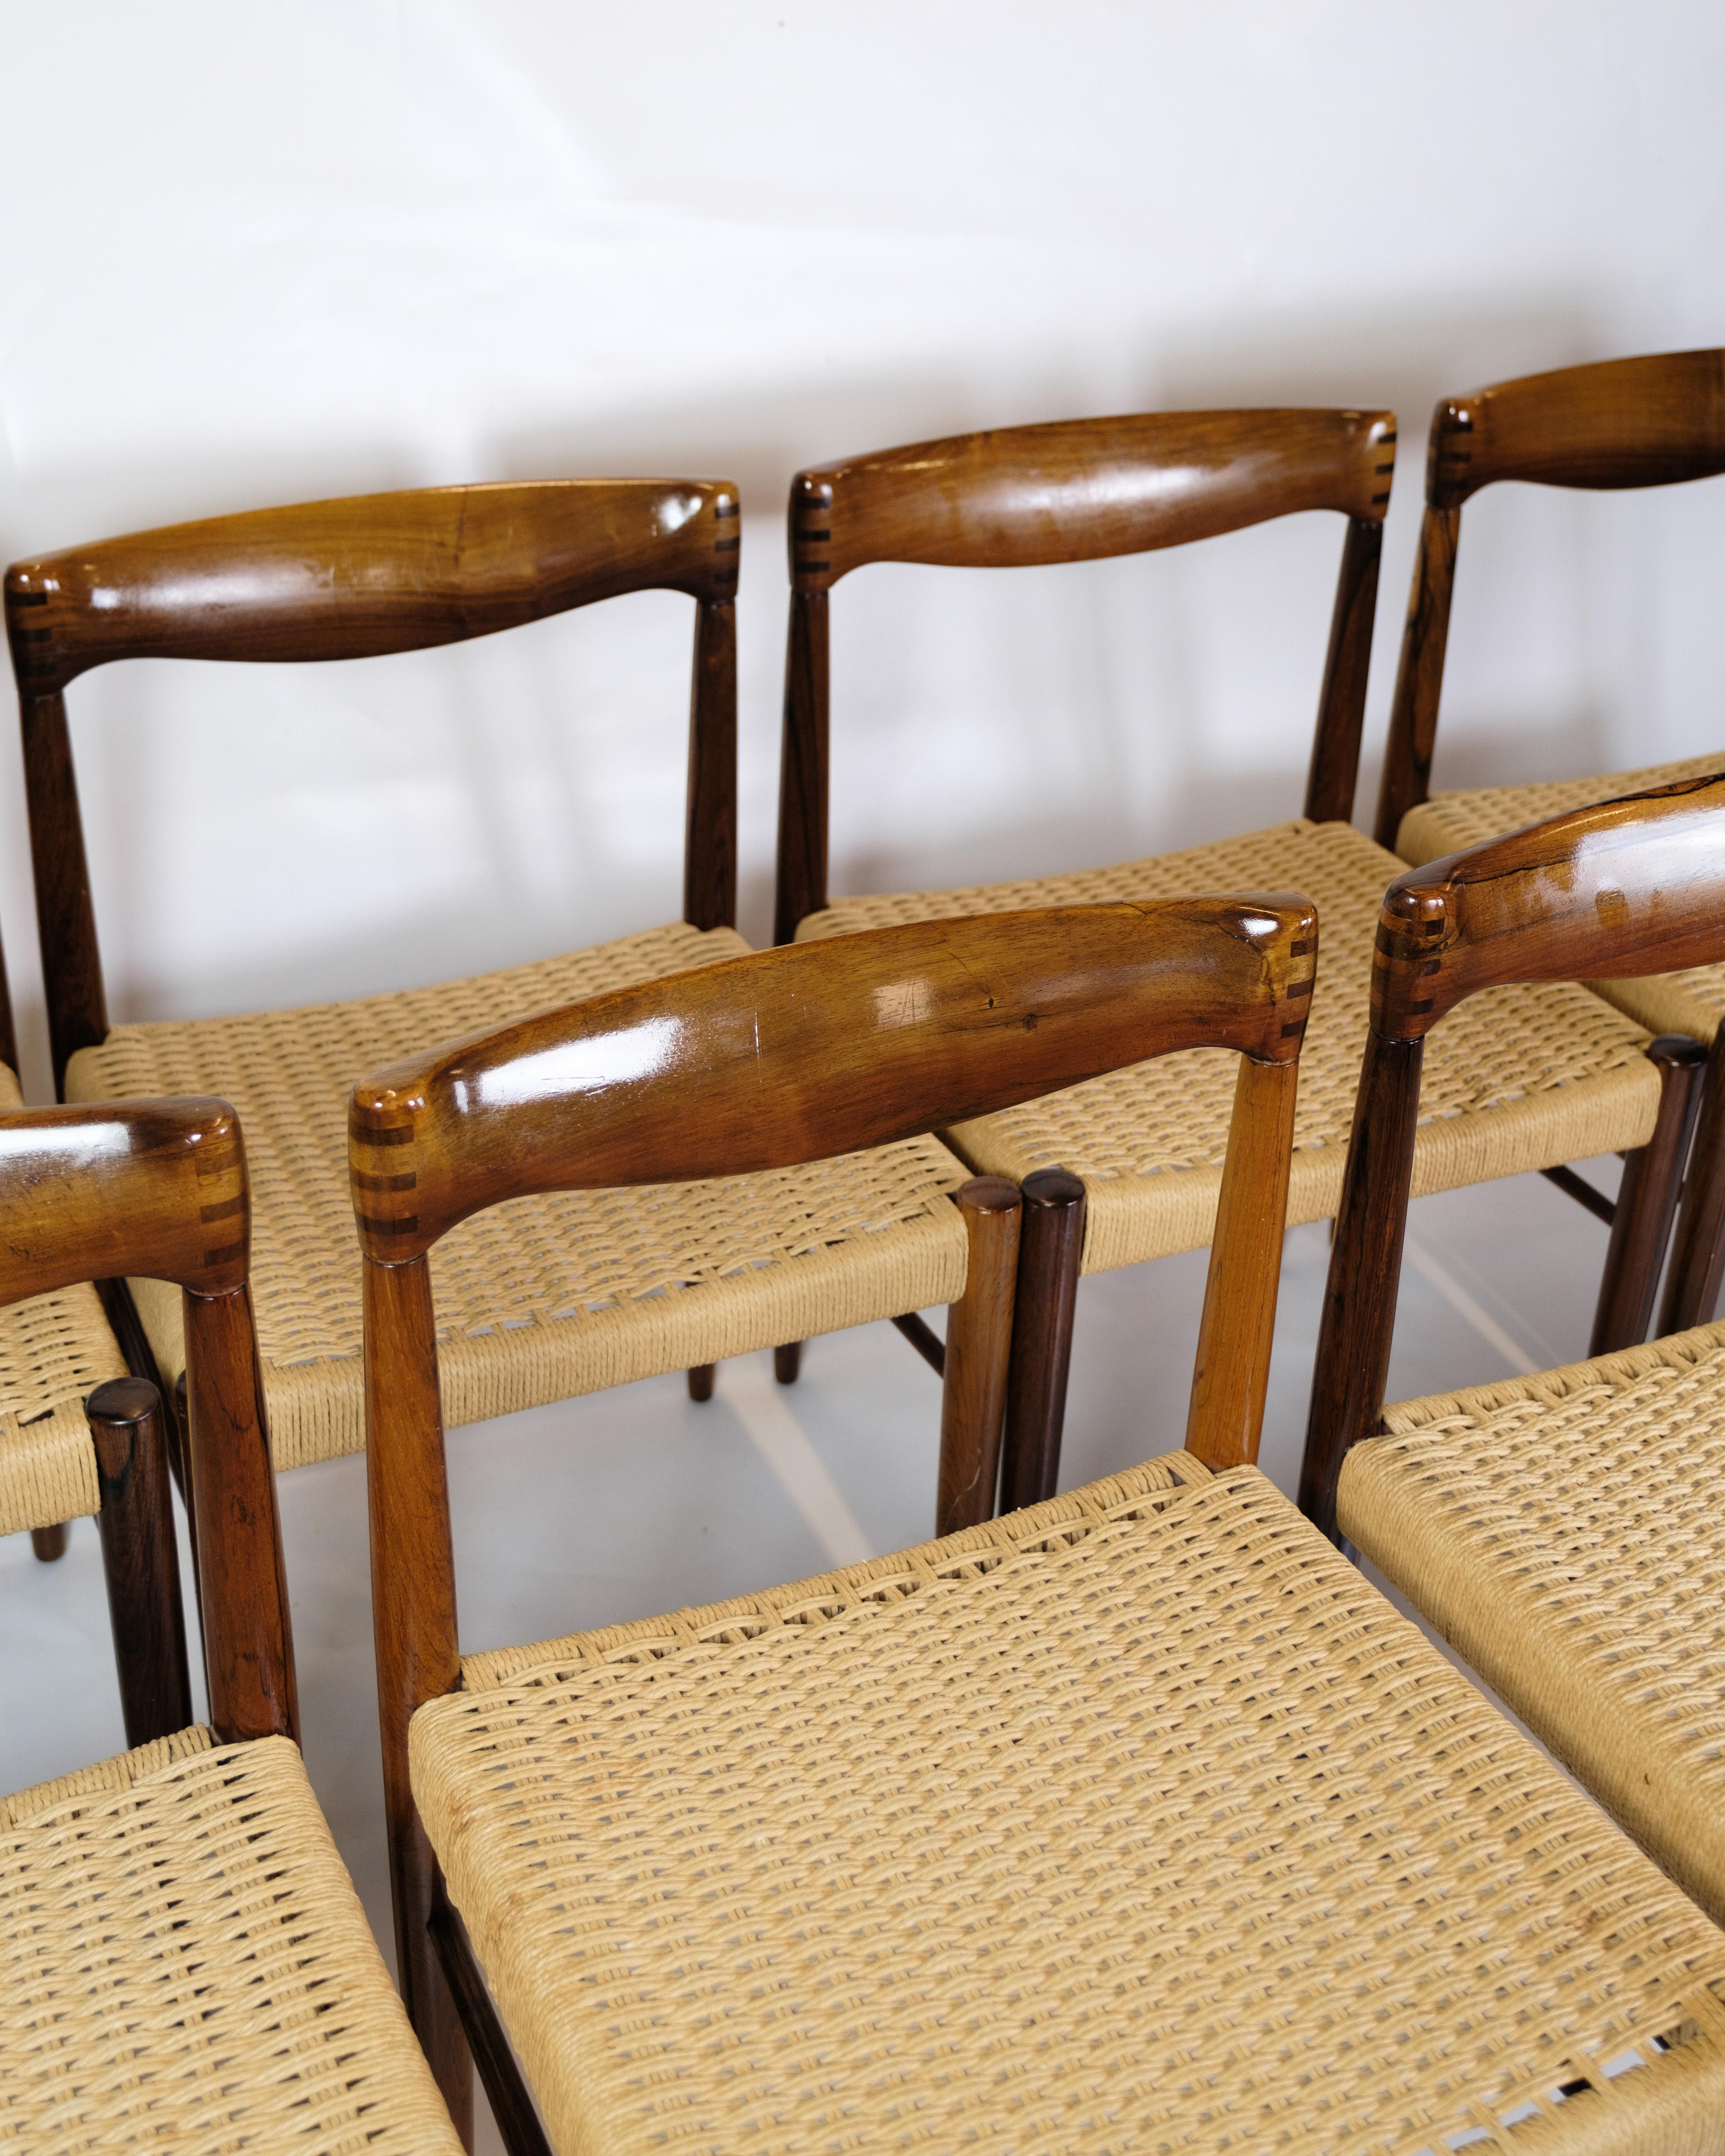 This set of eight dining table chairs is a splendid example of Danish furniture art from the 1960s, designed by Henry W. Klein and produced by Bramin. The chairs are made of rosewood and adorned with flat wicker seats, giving them a distinctive look